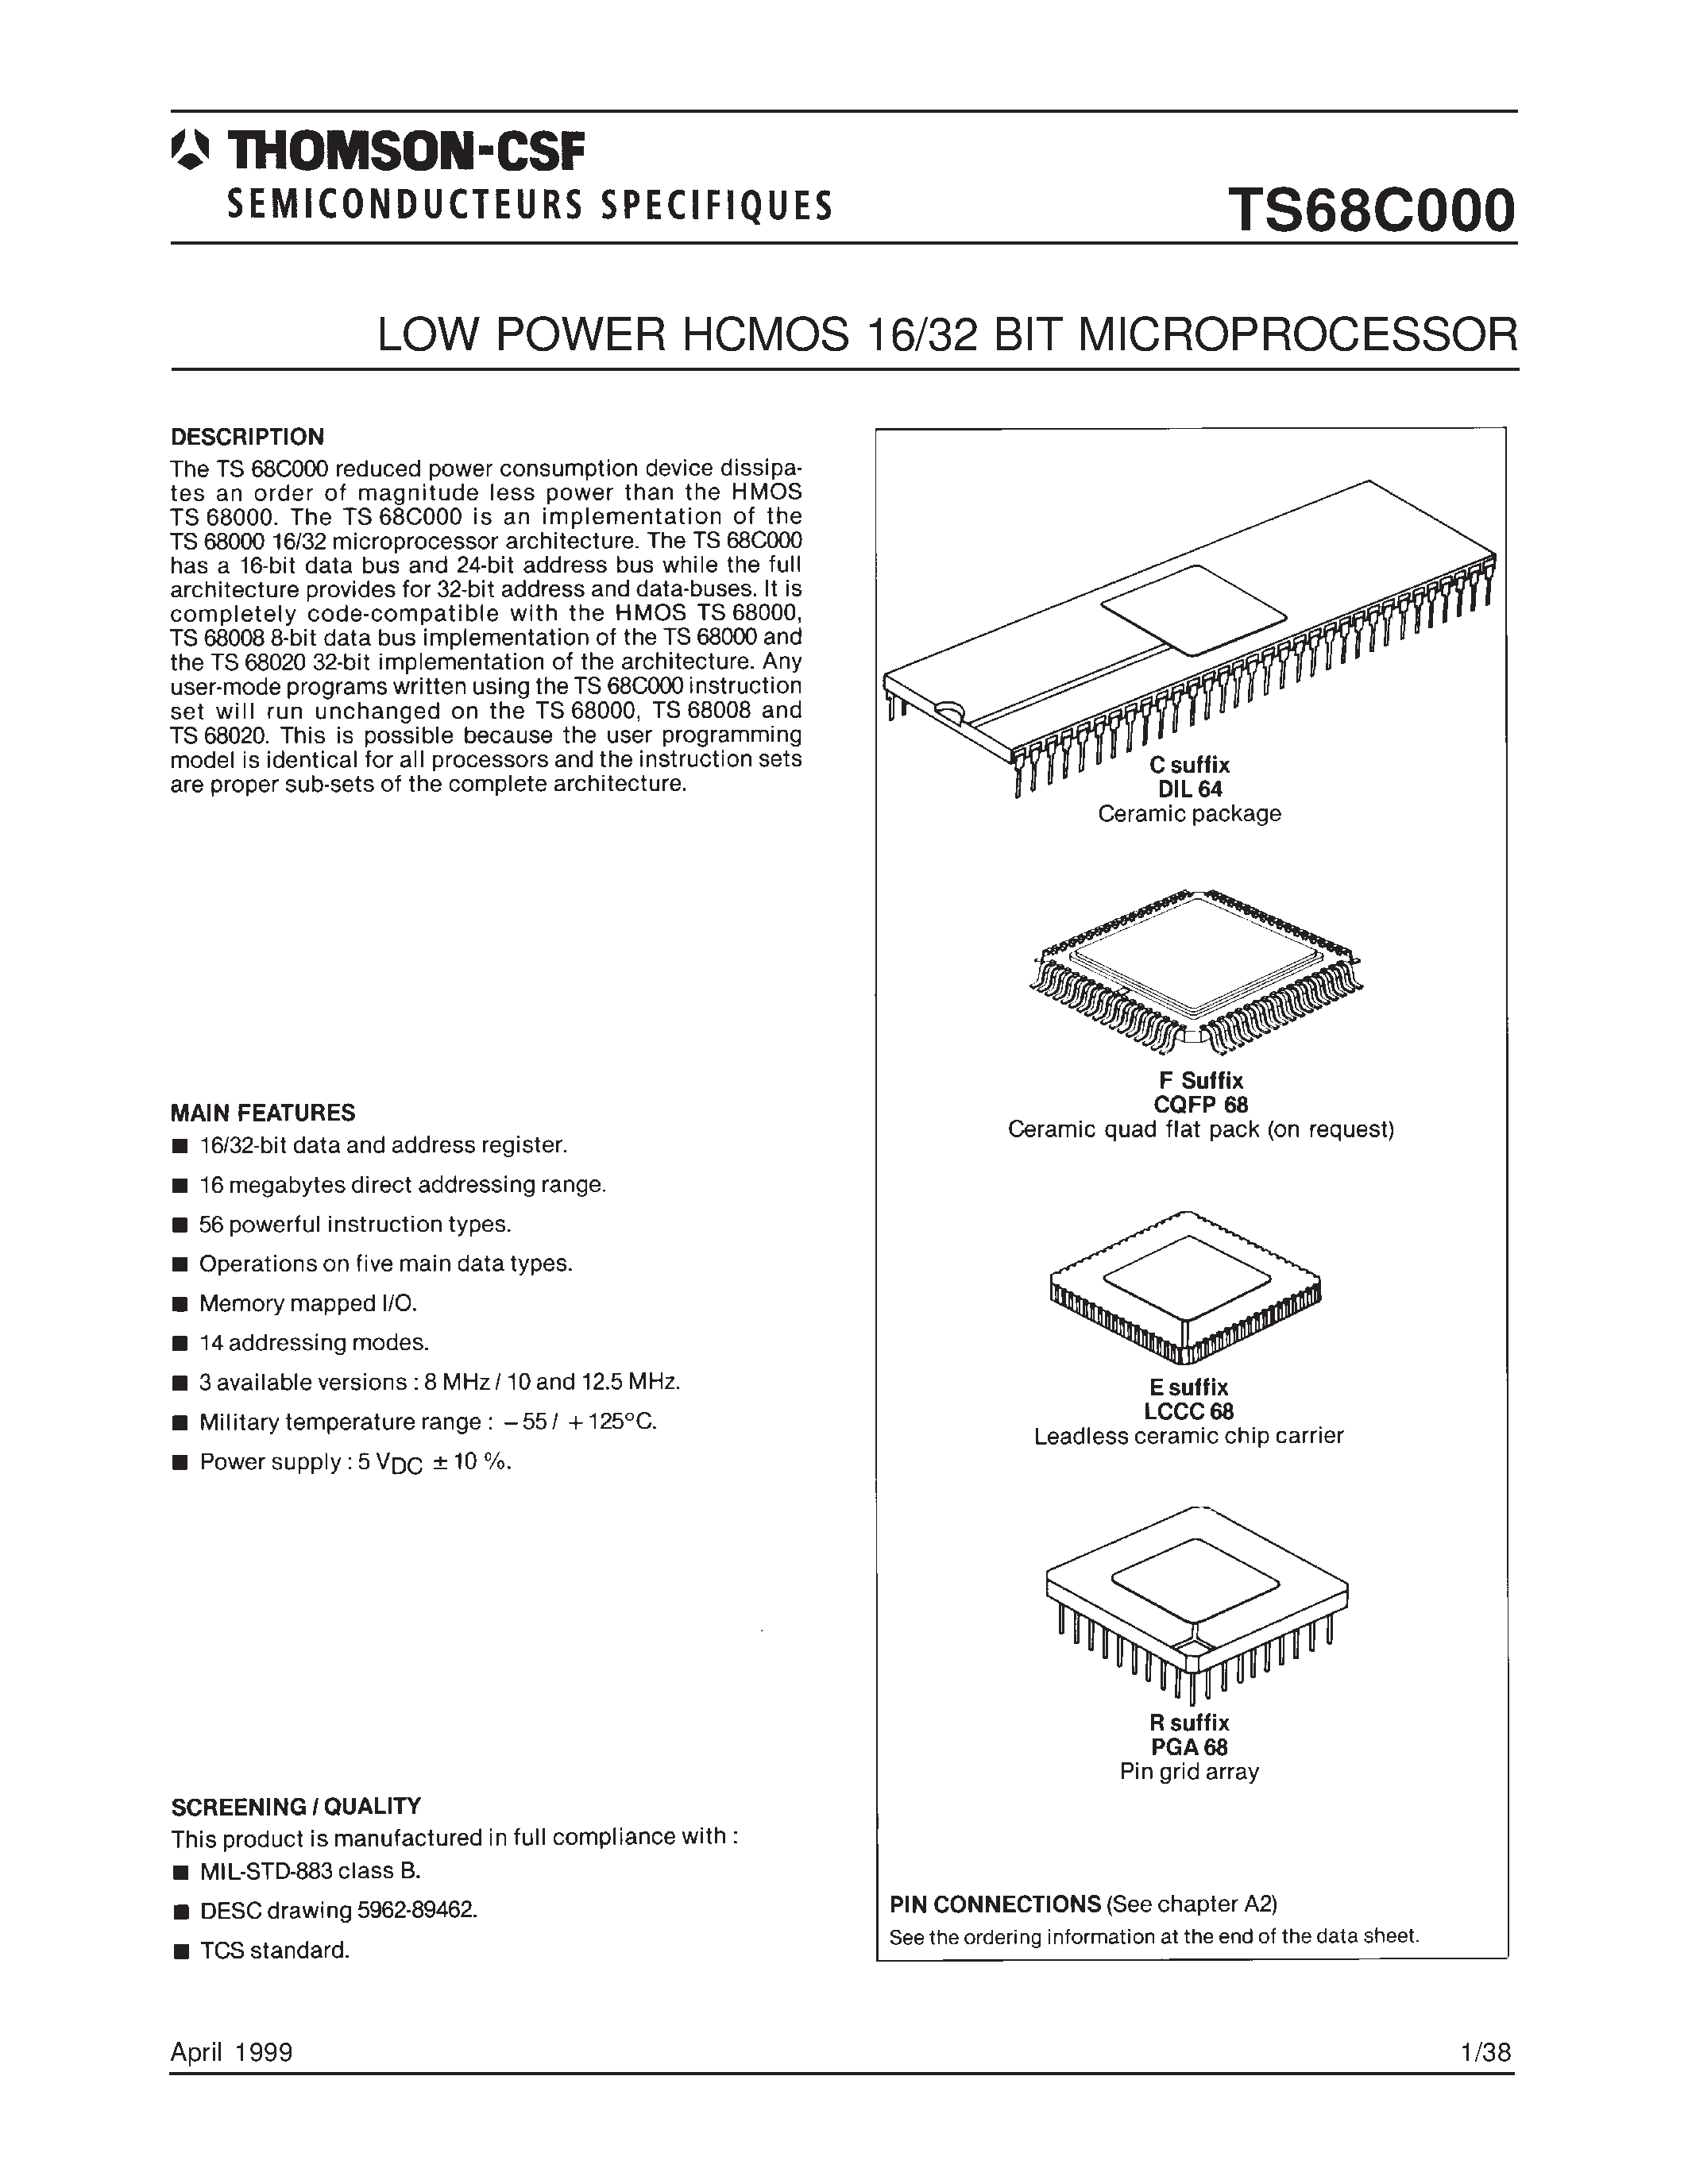 Datasheet TS68C000VR8A - LOW POWER HCMOS 16/32 BIT MICROPROCESSOR page 1